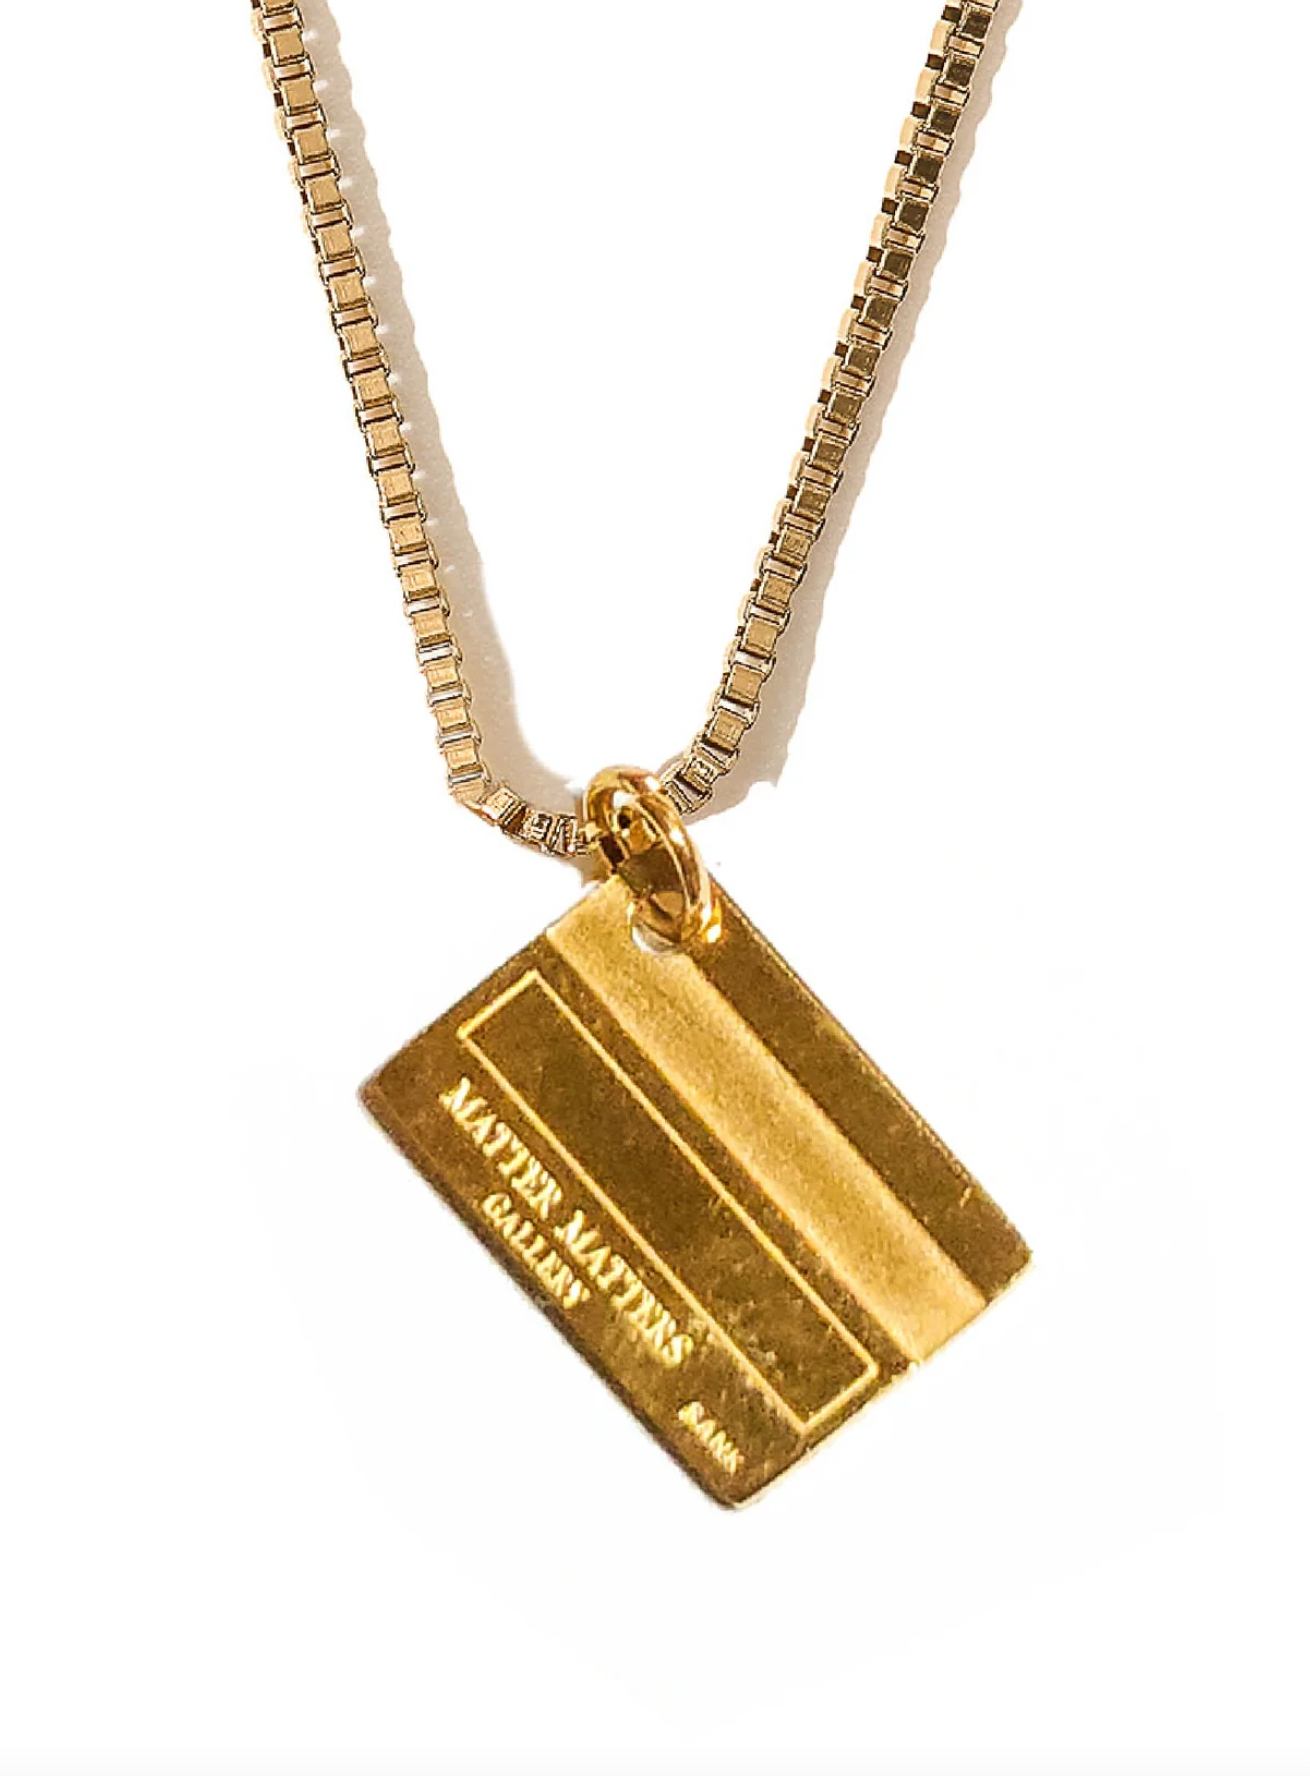 Matter Matters Unlimited Funds Credit Card Necklace • Gold